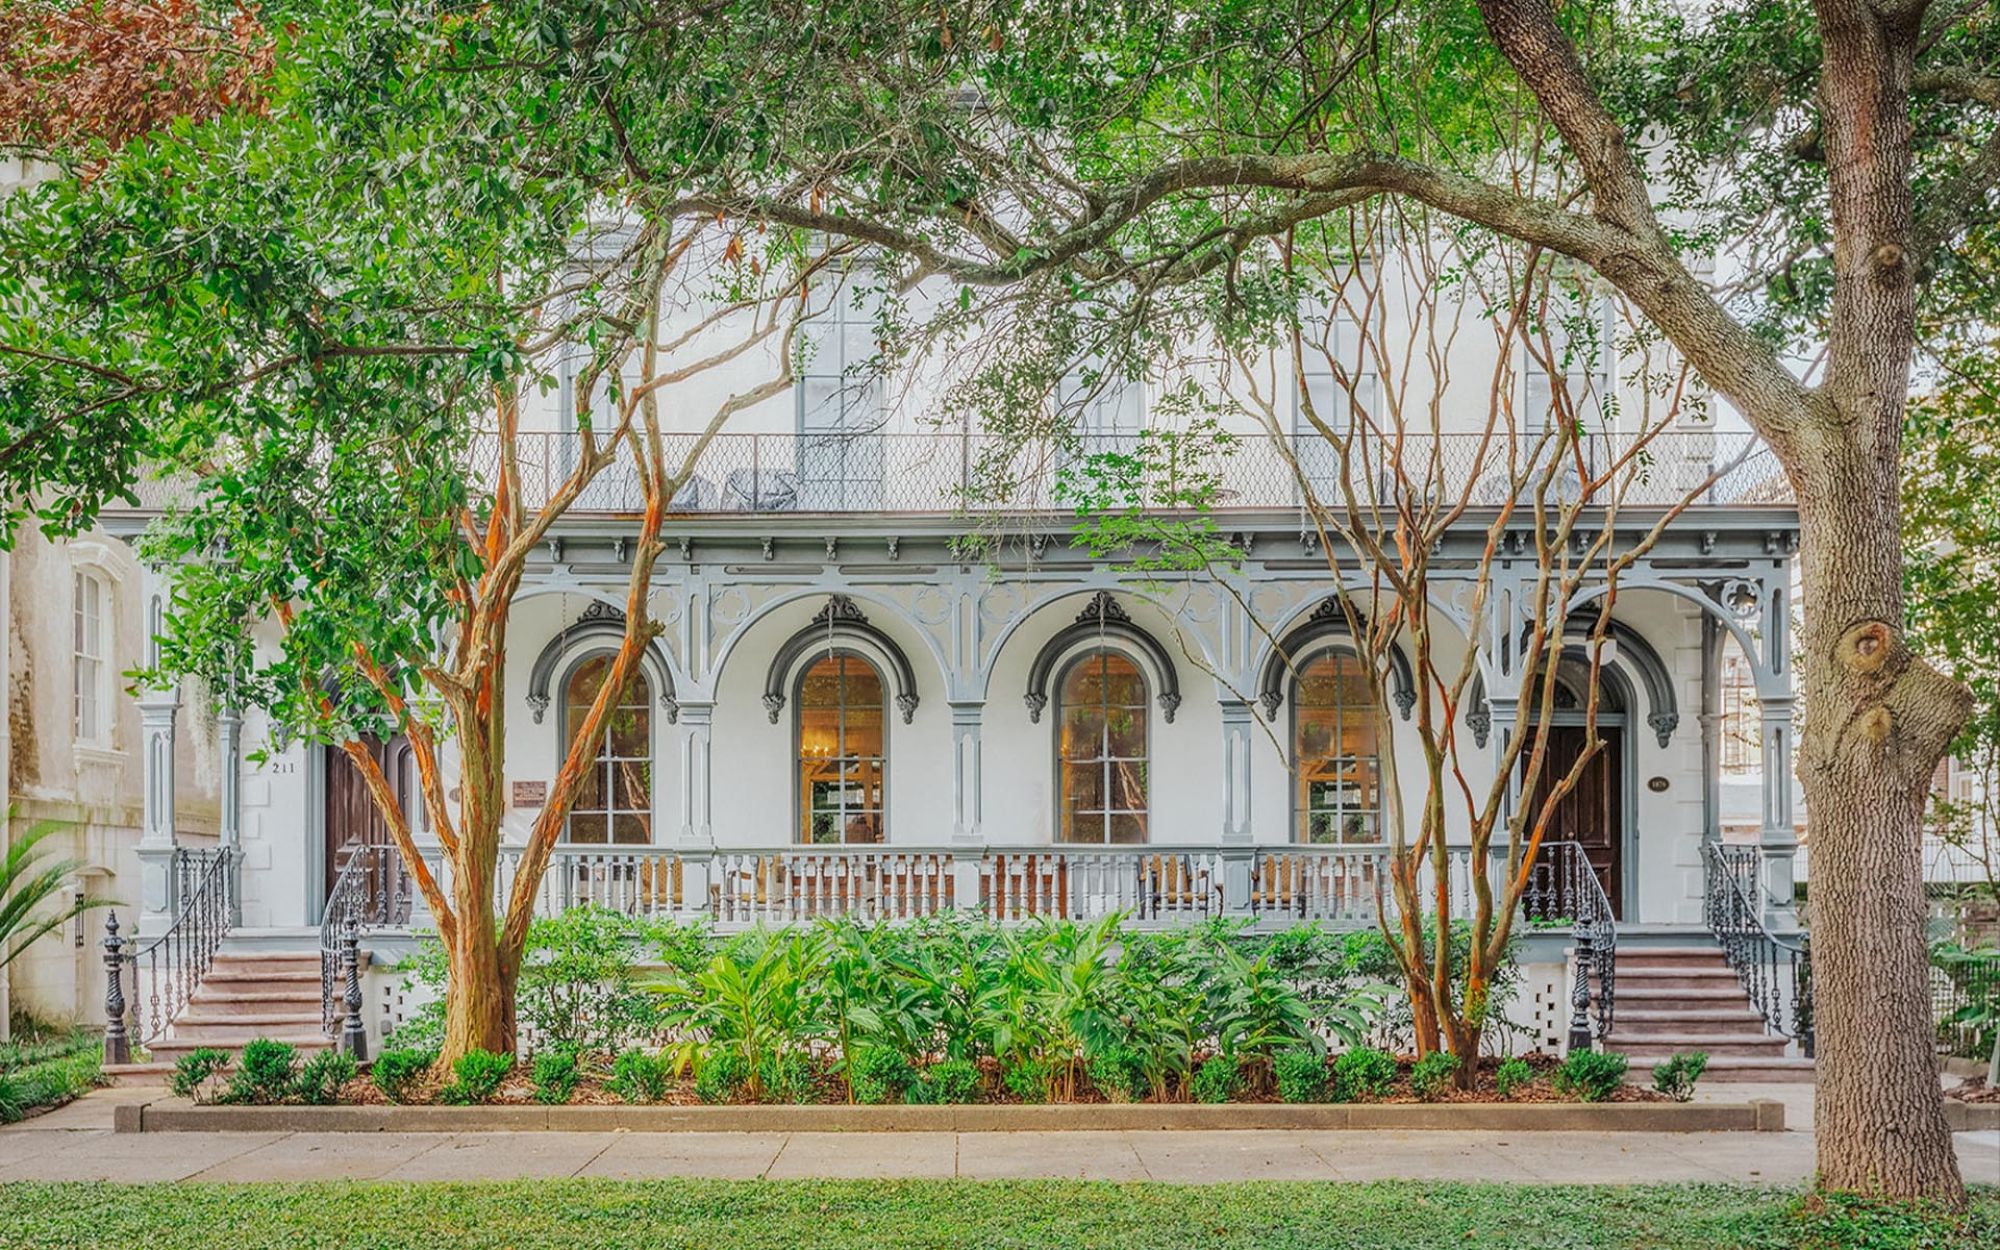 A classic, two-story building with arched windows and a porch is surrounded by lush greenery and trees on a sunny day, evoking a serene atmosphere.